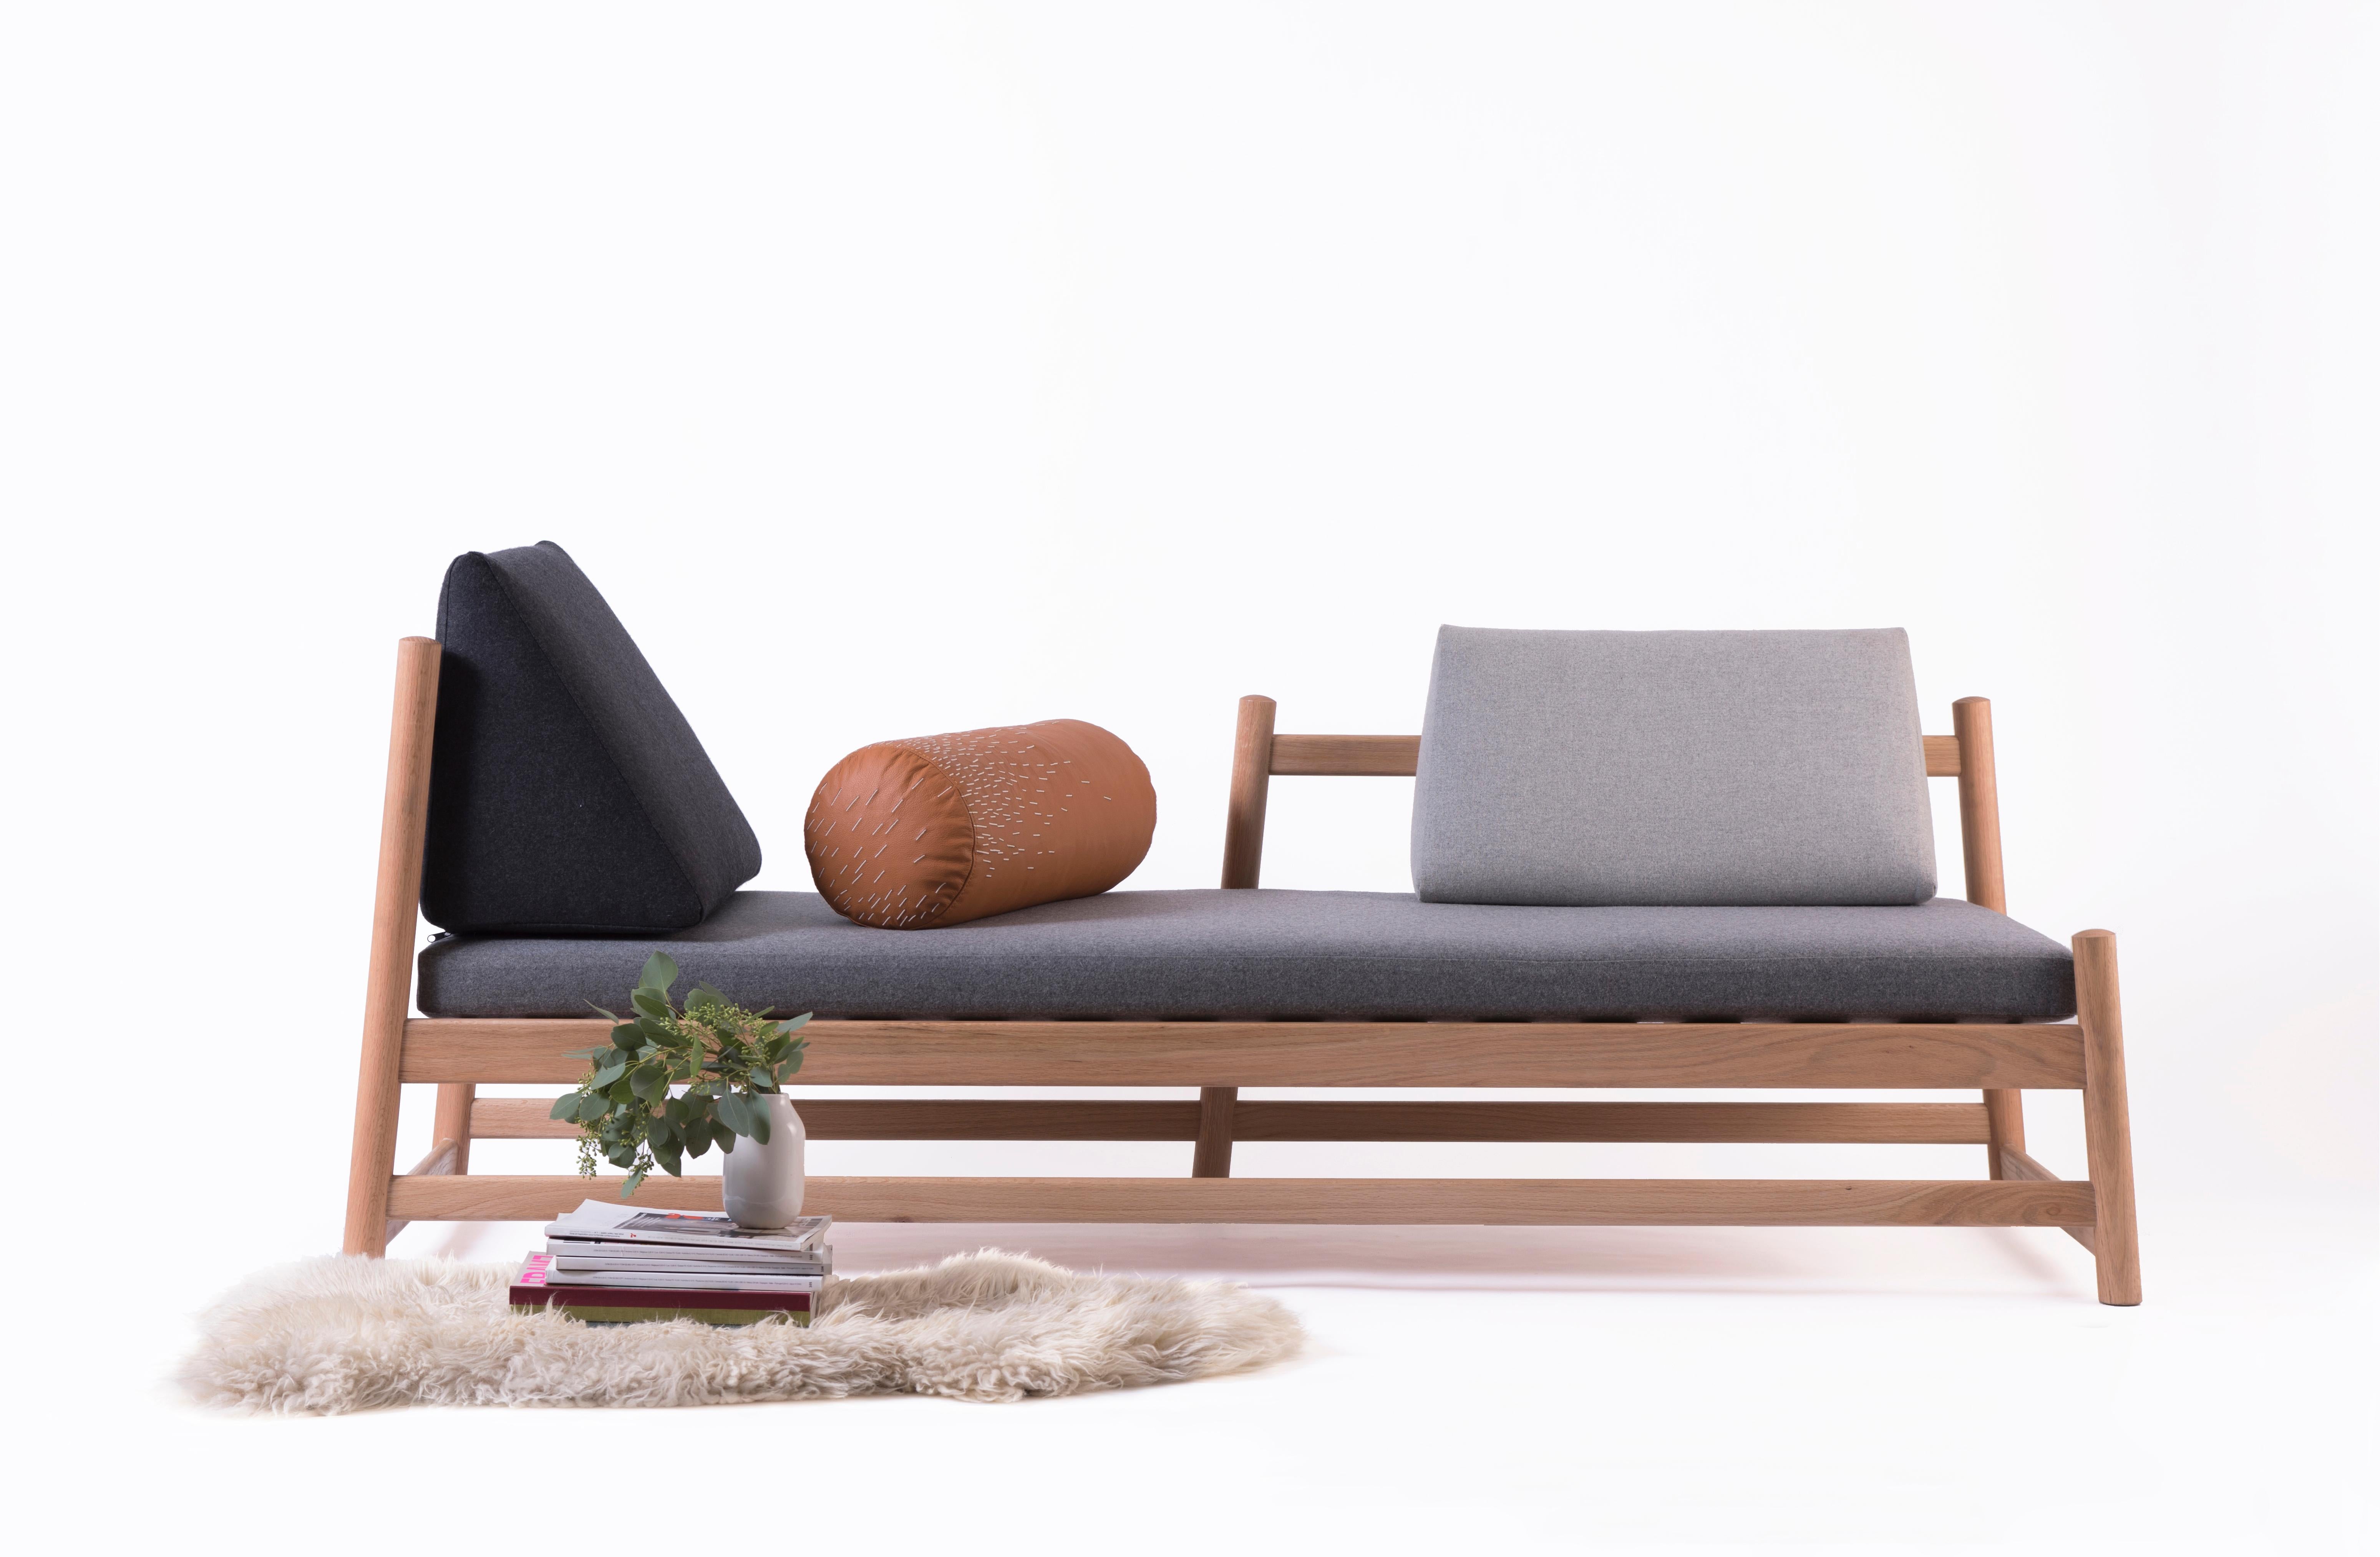 A daybed is the piece of furniture that every room needs, whether it knows it or not. Pita’s subtle lines in woodturned oak invite you to take a breath, close your eyes and halt the passage of time. Pita’s name comes from piteado, the traditional